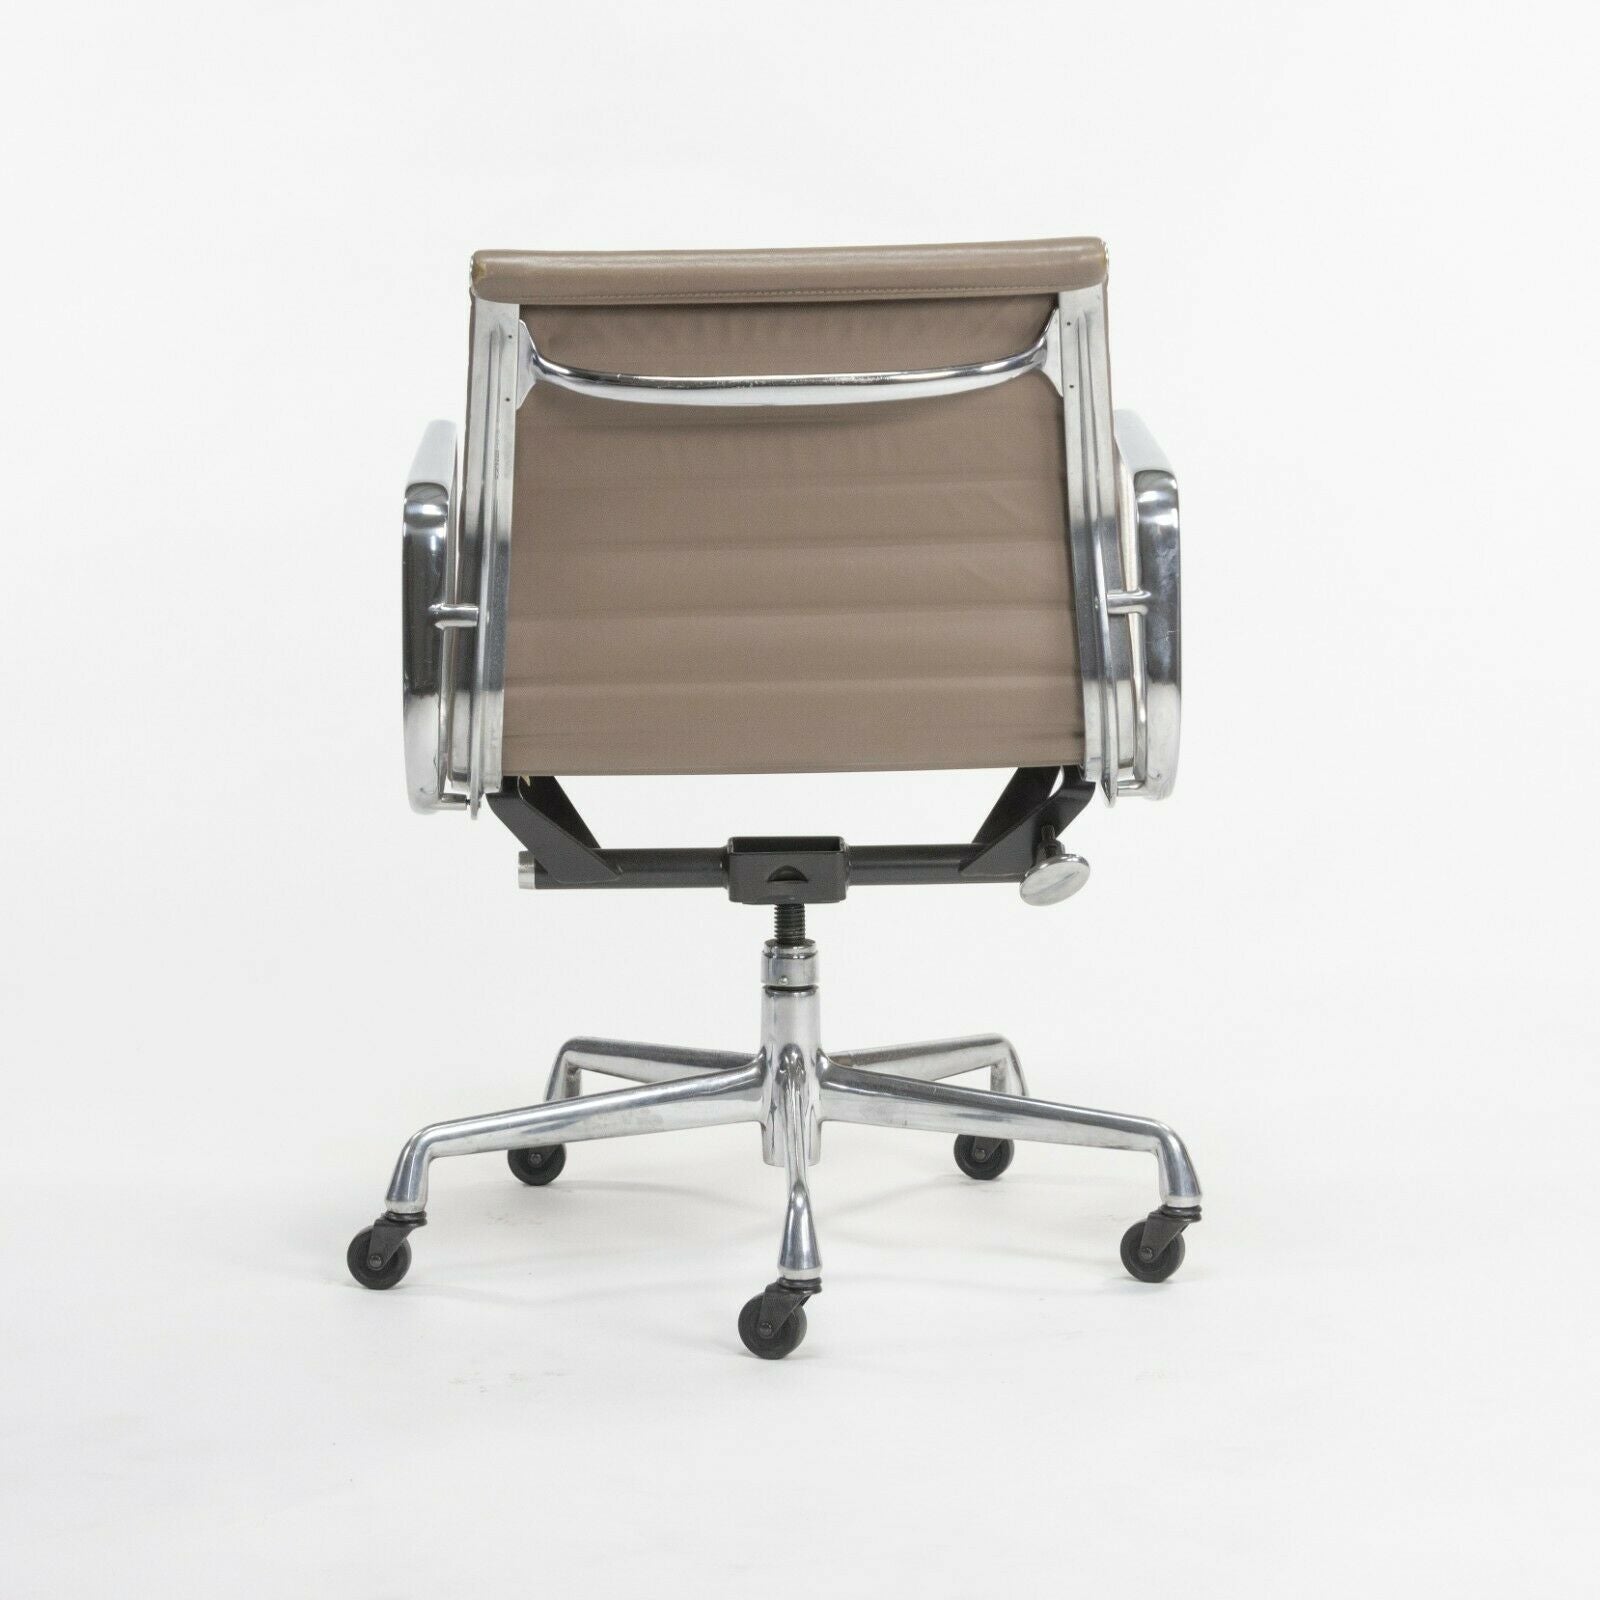 SOLD Greige Leather Herman Miller Eames Aluminum Group Management Desk Chair 8 Available